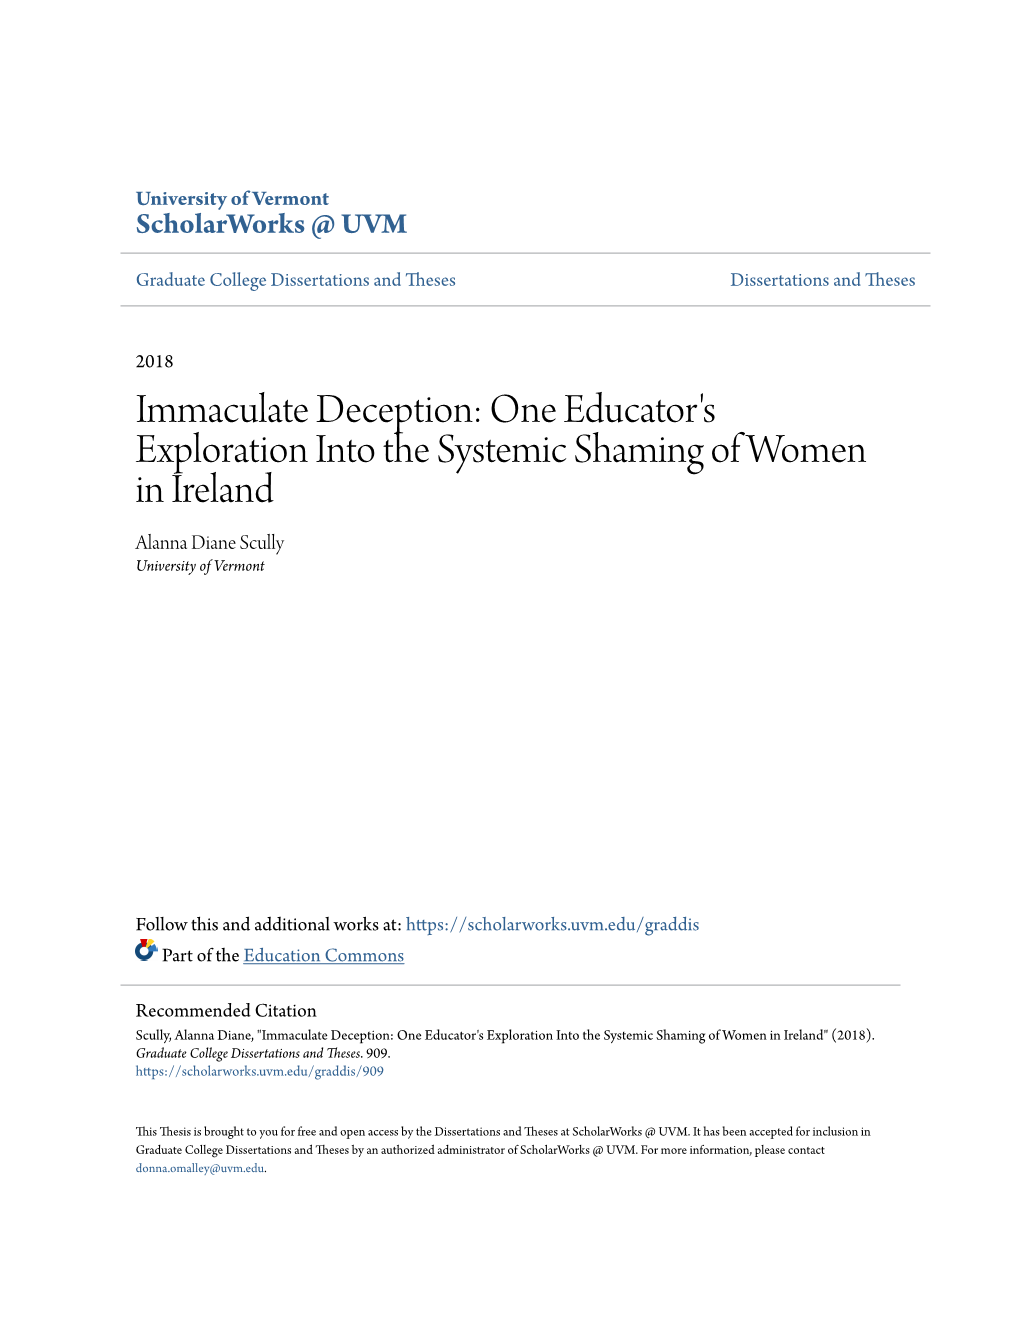 Immaculate Deception: One Educator's Exploration Into the Systemic Shaming of Women in Ireland Alanna Diane Scully University of Vermont